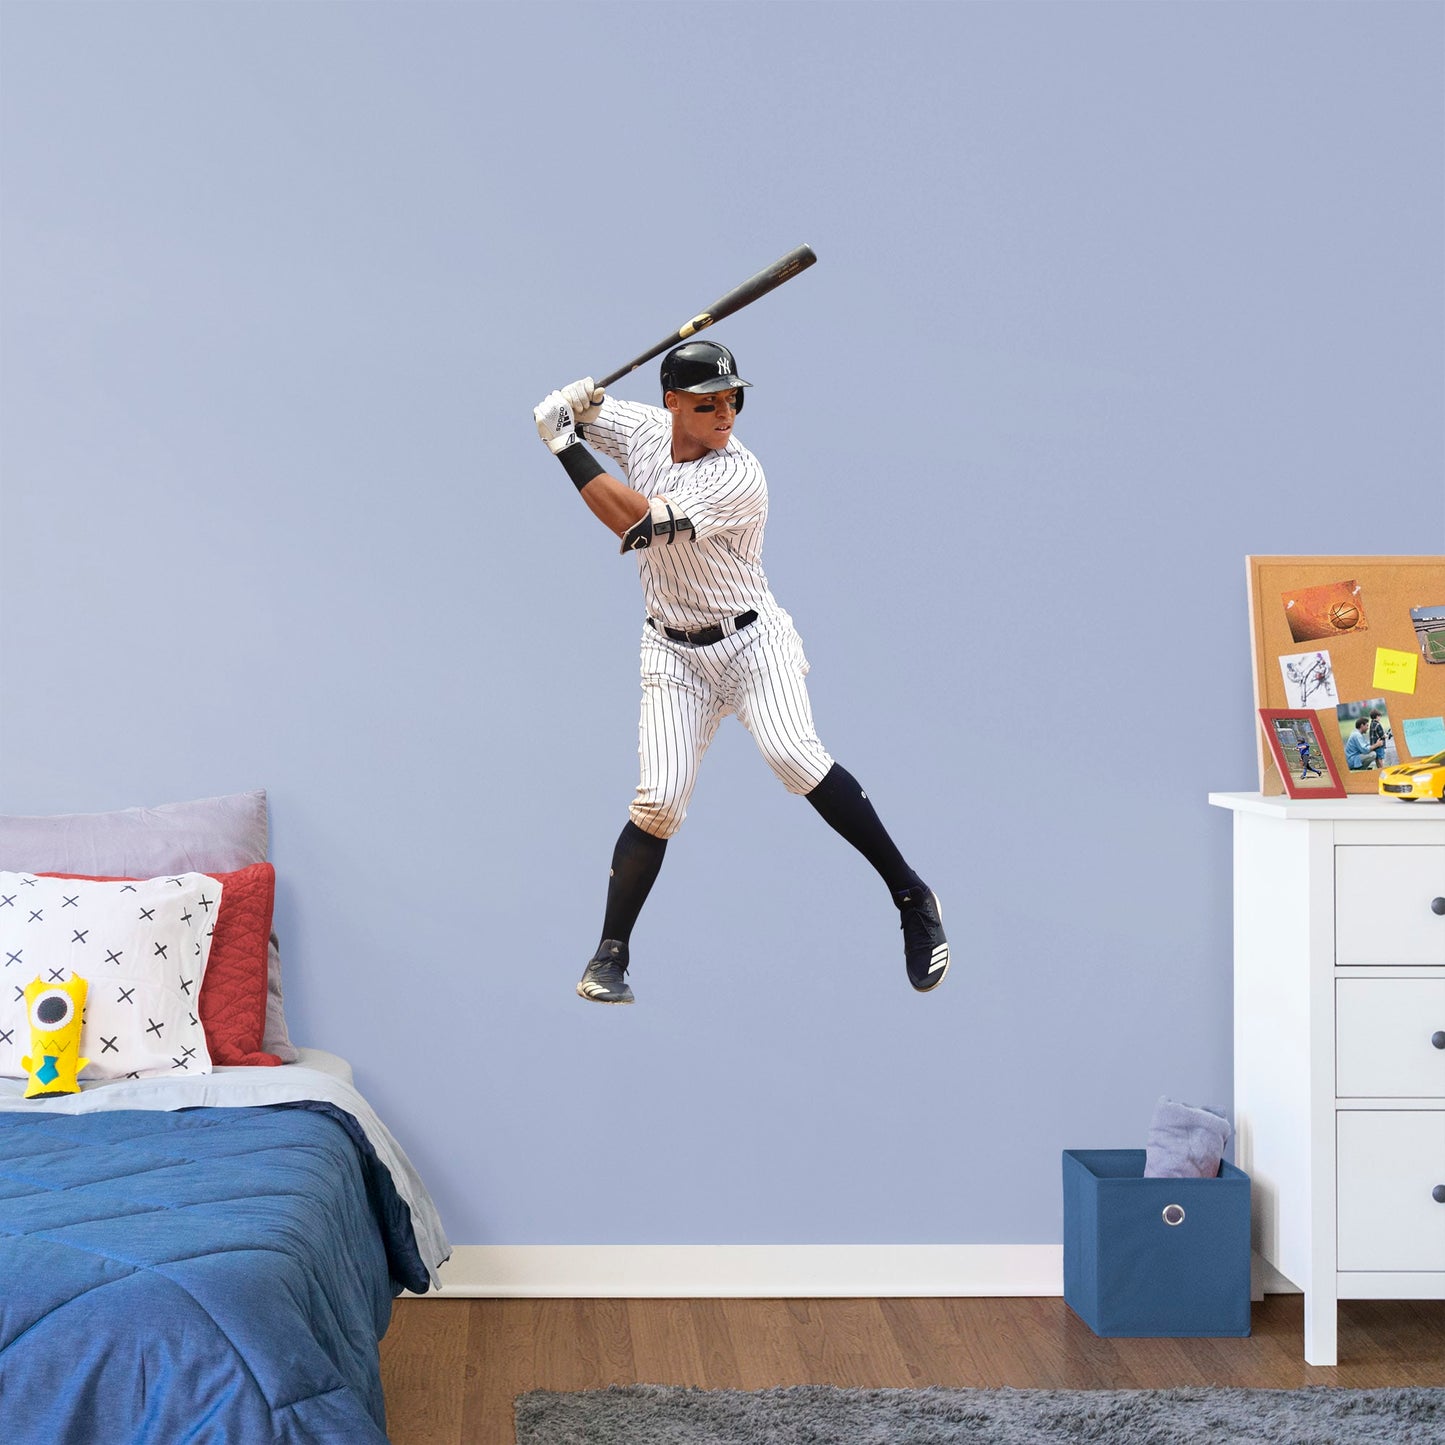 Life-Size Athlete + 2 Decals (49"W x 89"H) Feed your inner sports fanatic with this unique Aaron Judge wall decal. Perfect for unseasoned Yanks or lifelong season-ticket holders, the reusable image of the 2017 Rookie of the Year pick can be moved from room to room with ease. The verdict is in: this adhesive graphic is perfect die-hard fans of The Judge.